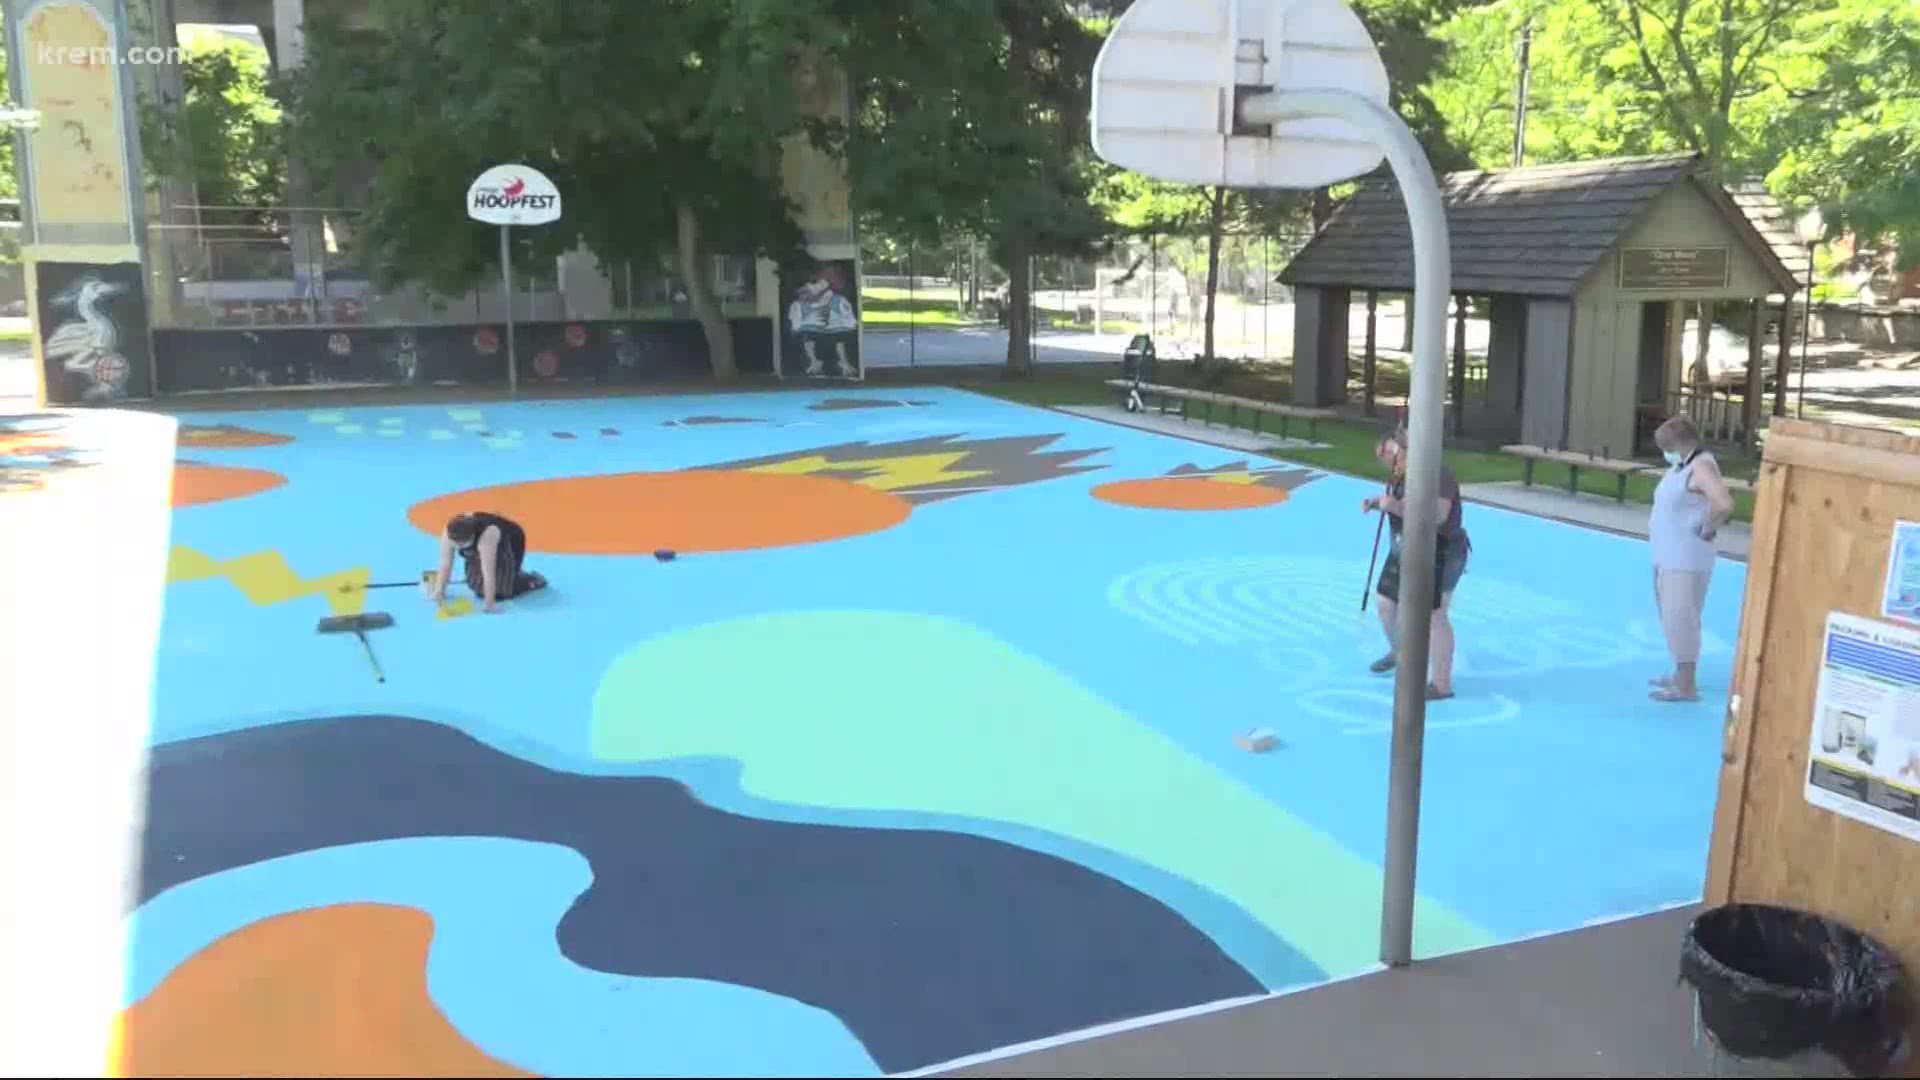 Even though Hoopfest canceled its annual event, the organization is still providing Spokane with new court murals.